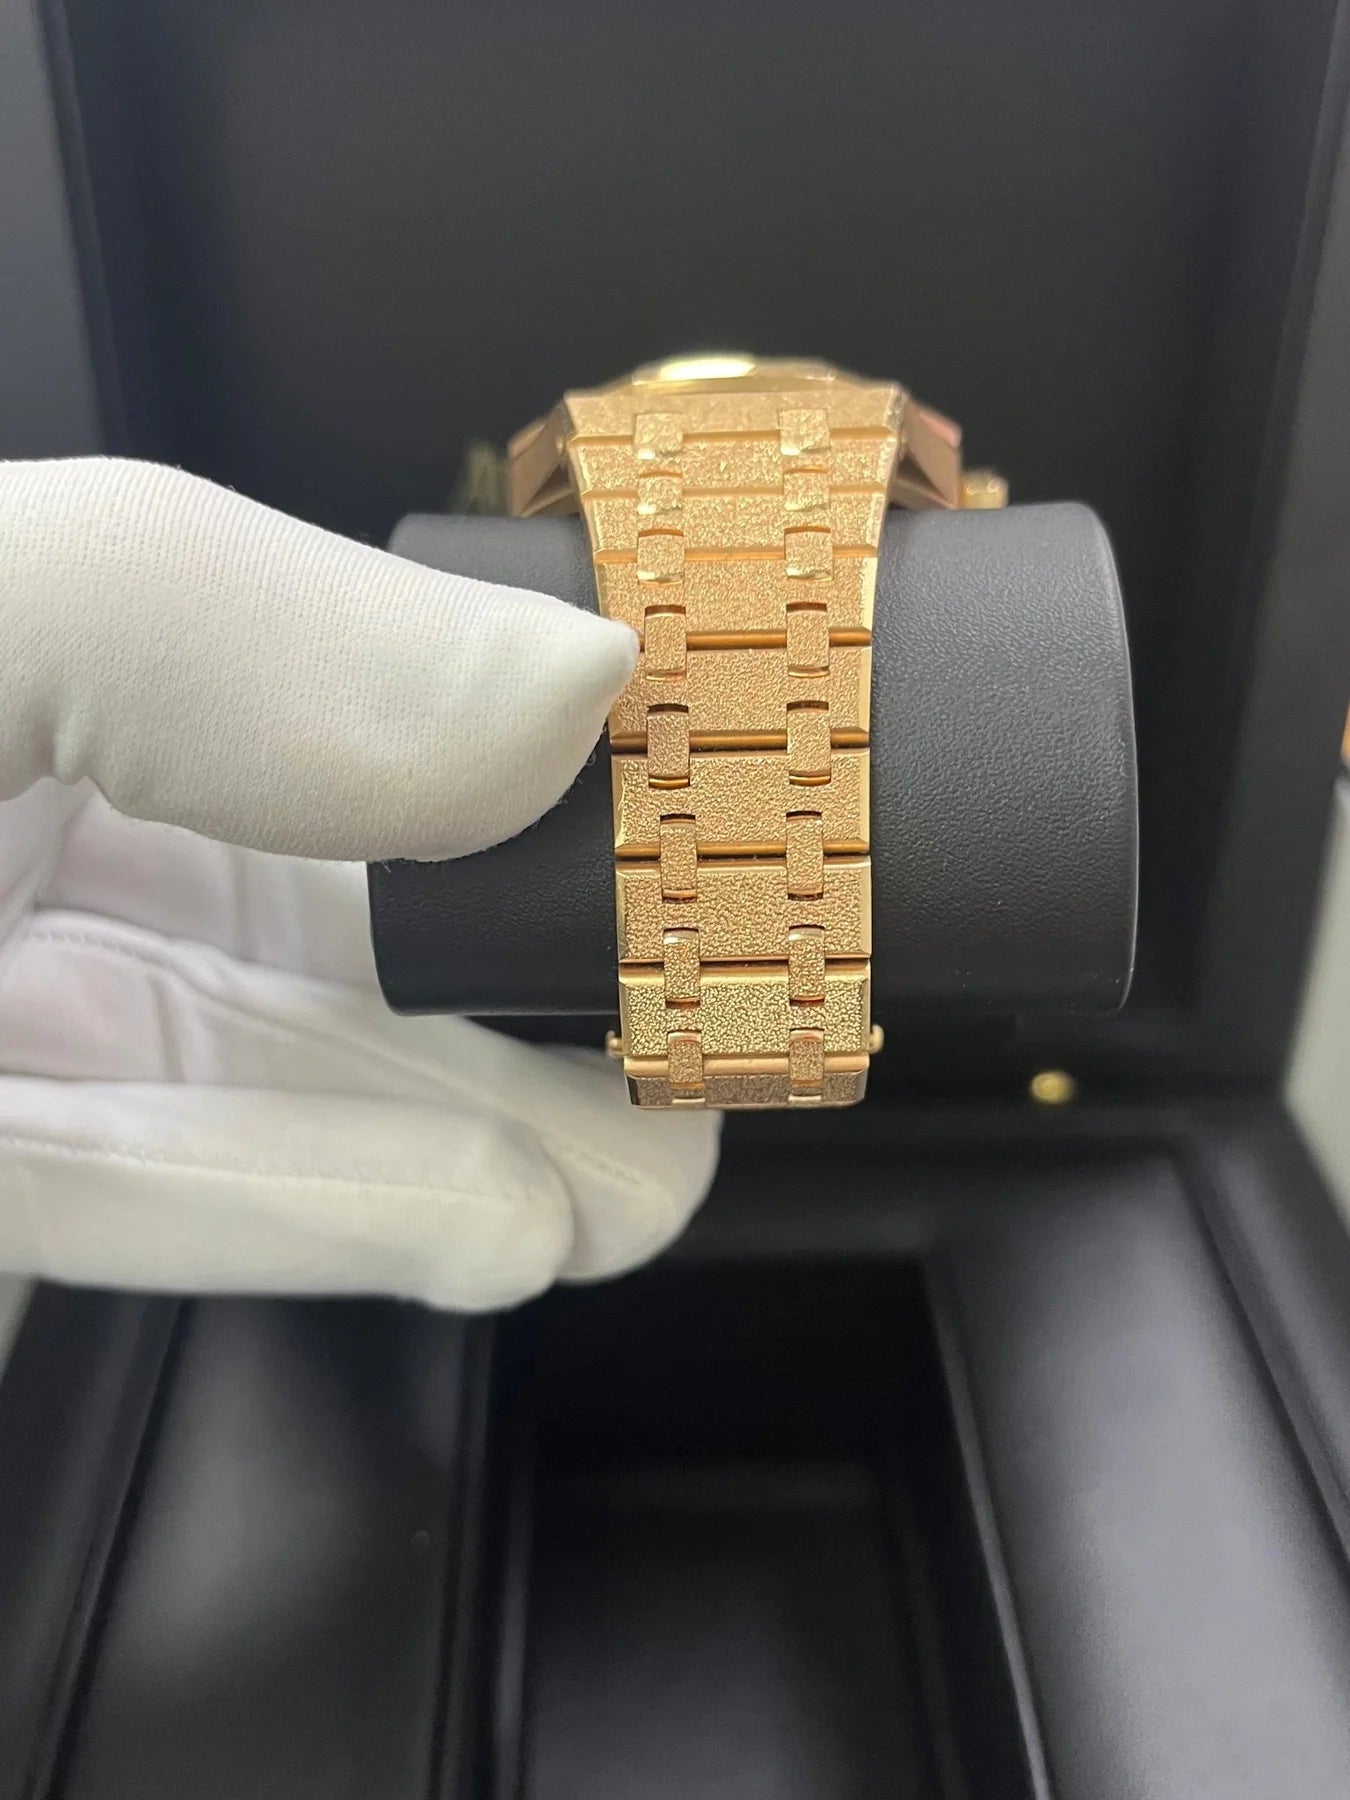 Audemars Piguet Royal Oak Lady Ladies 37mm Frosted Rose Gold White Dial 15454OR.GG.1259OR.01